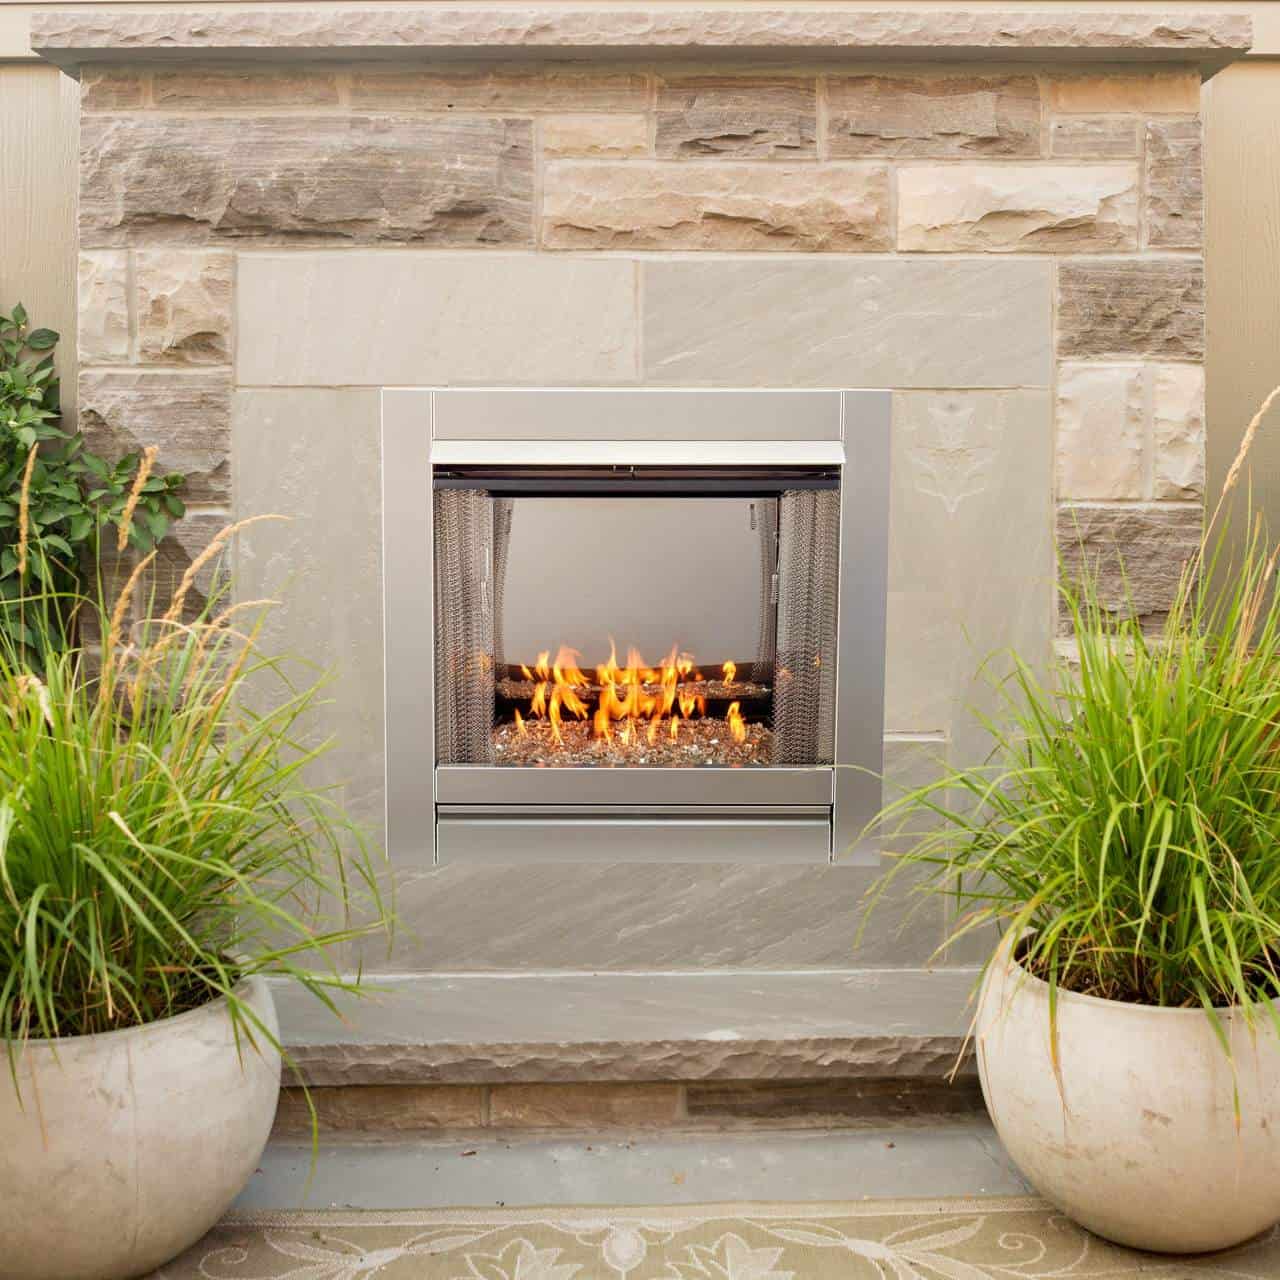 Stainless Outdoor Gas Fireplace Insert, Outdoor Gas Fireplace Units